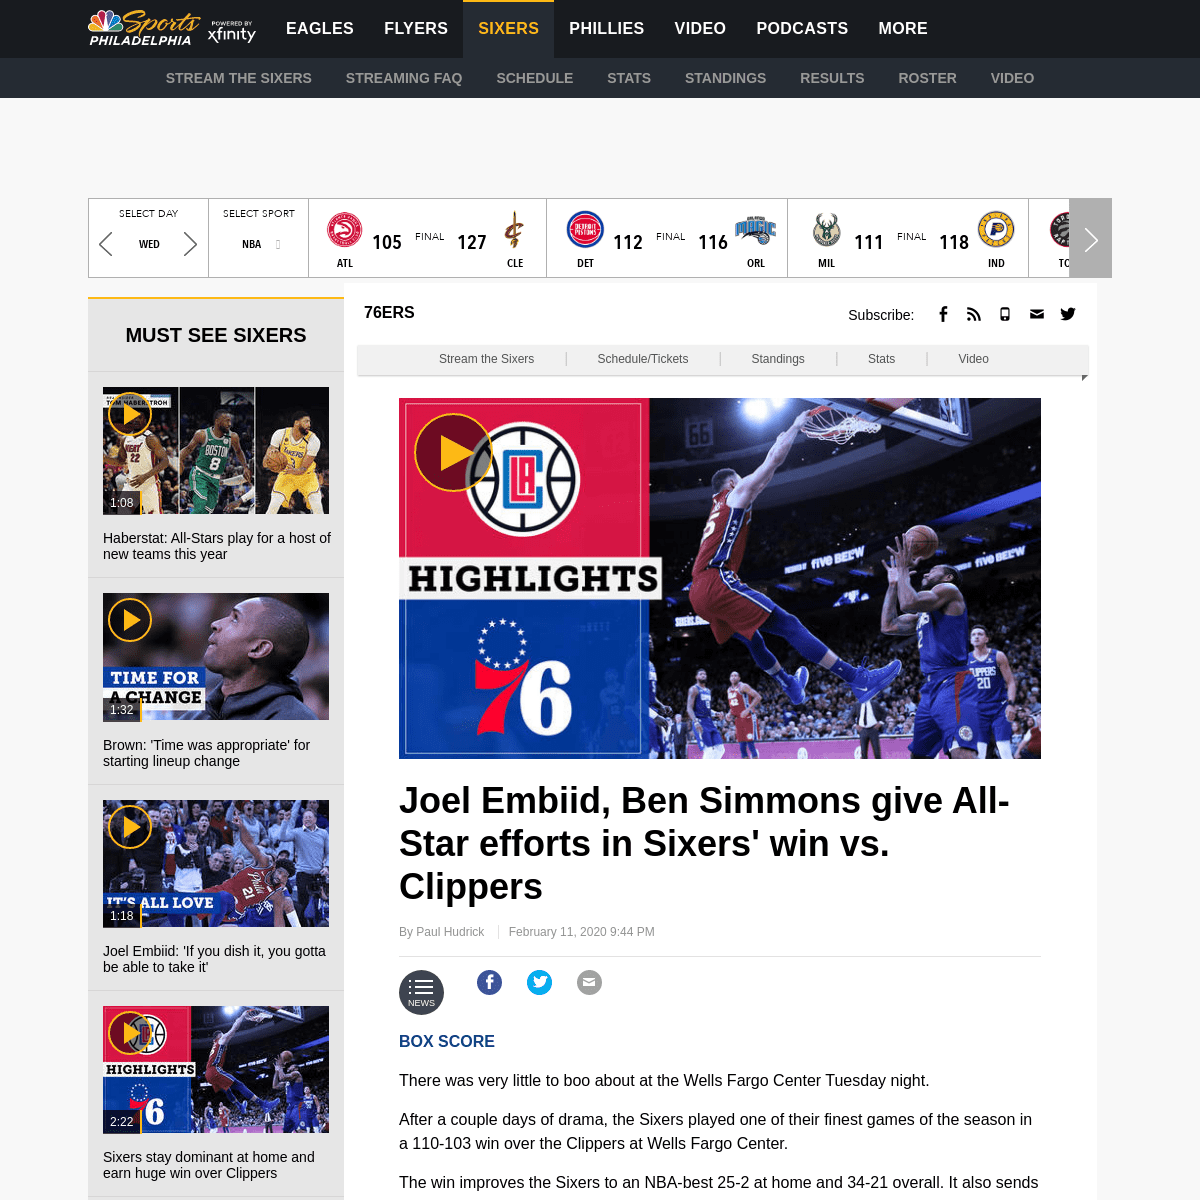 A complete backup of www.nbcsports.com/philadelphia/76ers/joel-embiid-ben-simmons-give-all-star-efforts-sixers-win-vs-clippers